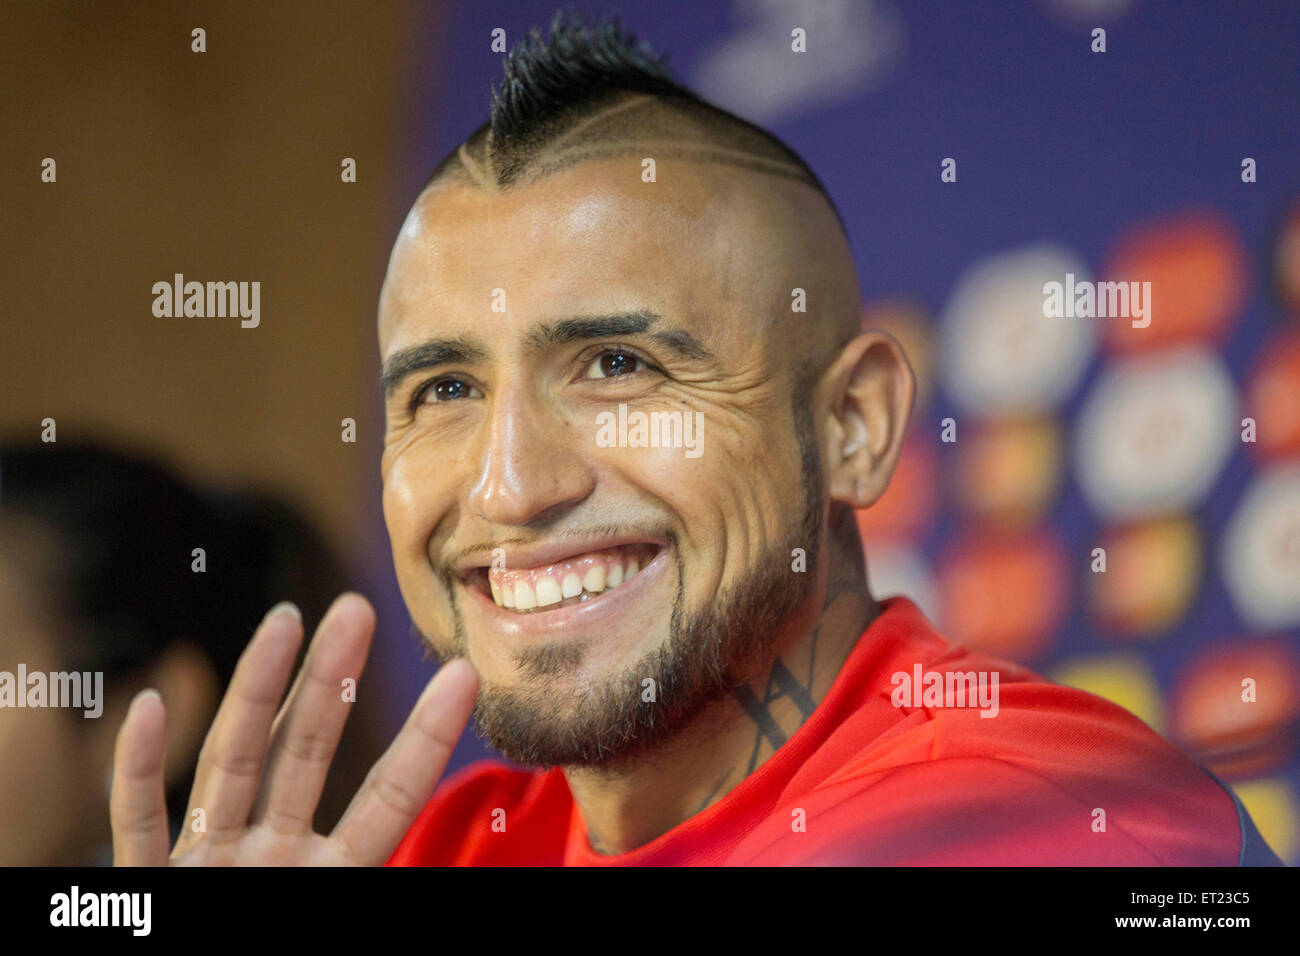 Santiago, Chile. 10th June, 2015. Chile's national soccer team player Arturo Vidal reacts during a press conference prior to the opening match of the 2015 Copa America agaisnt Ecuador, in the city of Santiago, capital of Chile, on June 10, 2015. The 2015 Copa America will be held in Chile from June 11 to July 4. Credit:  Luis Echeverria/Xinhua/Alamy Live News Stock Photo